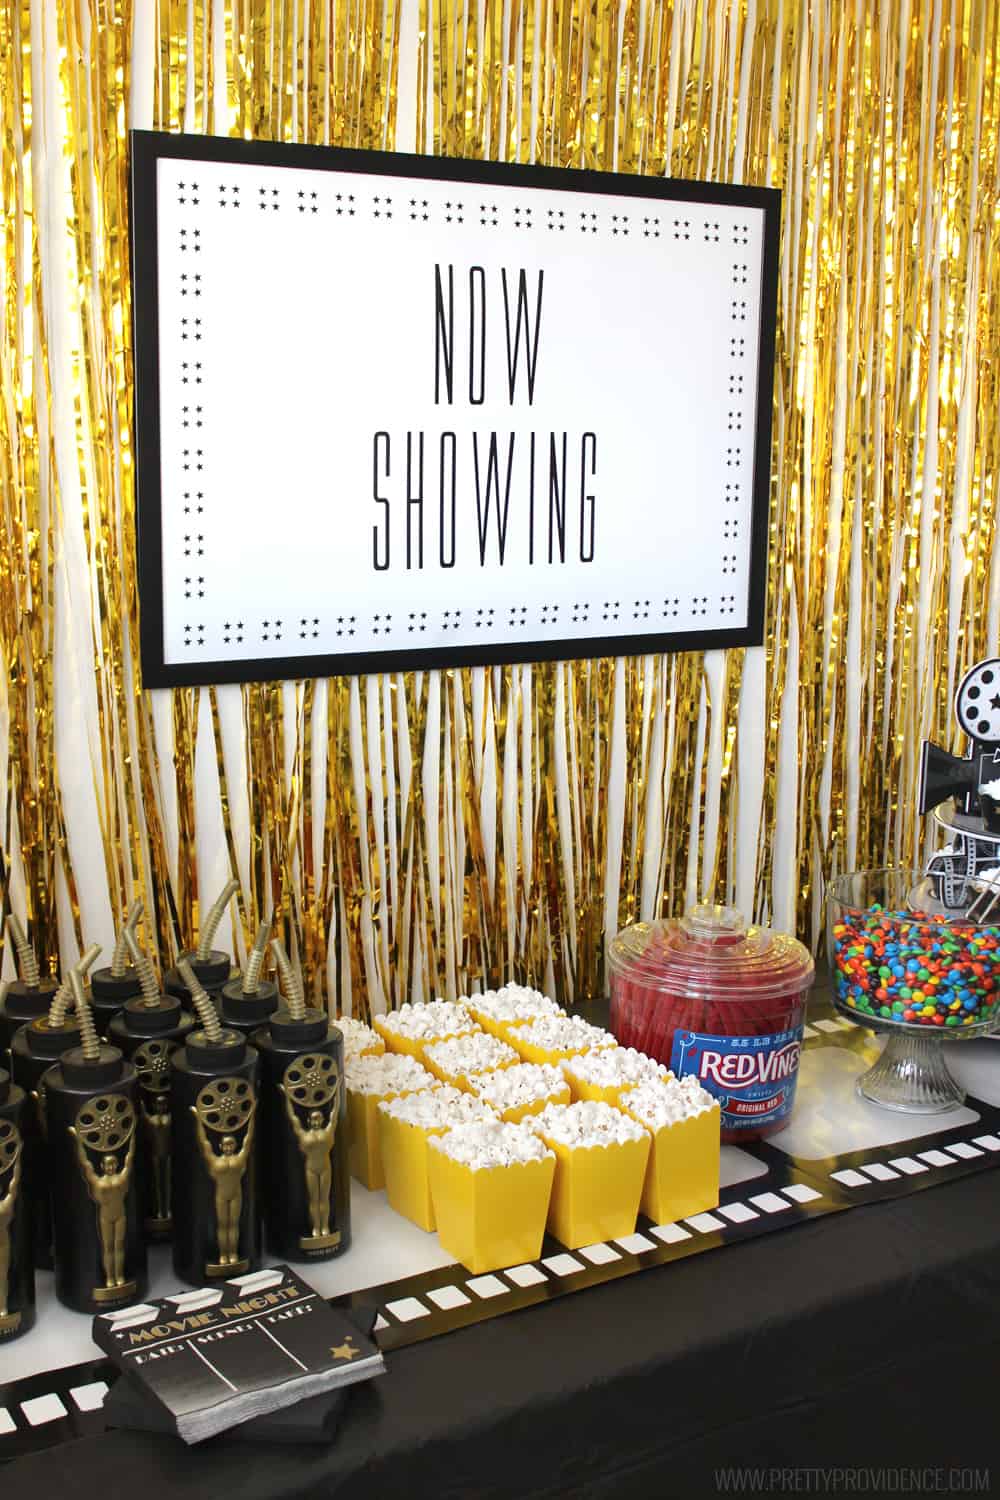 My son LOVED this fun and easy movie party we threw for his sixth birthday! Affordable, festive and all the kids loved it! 